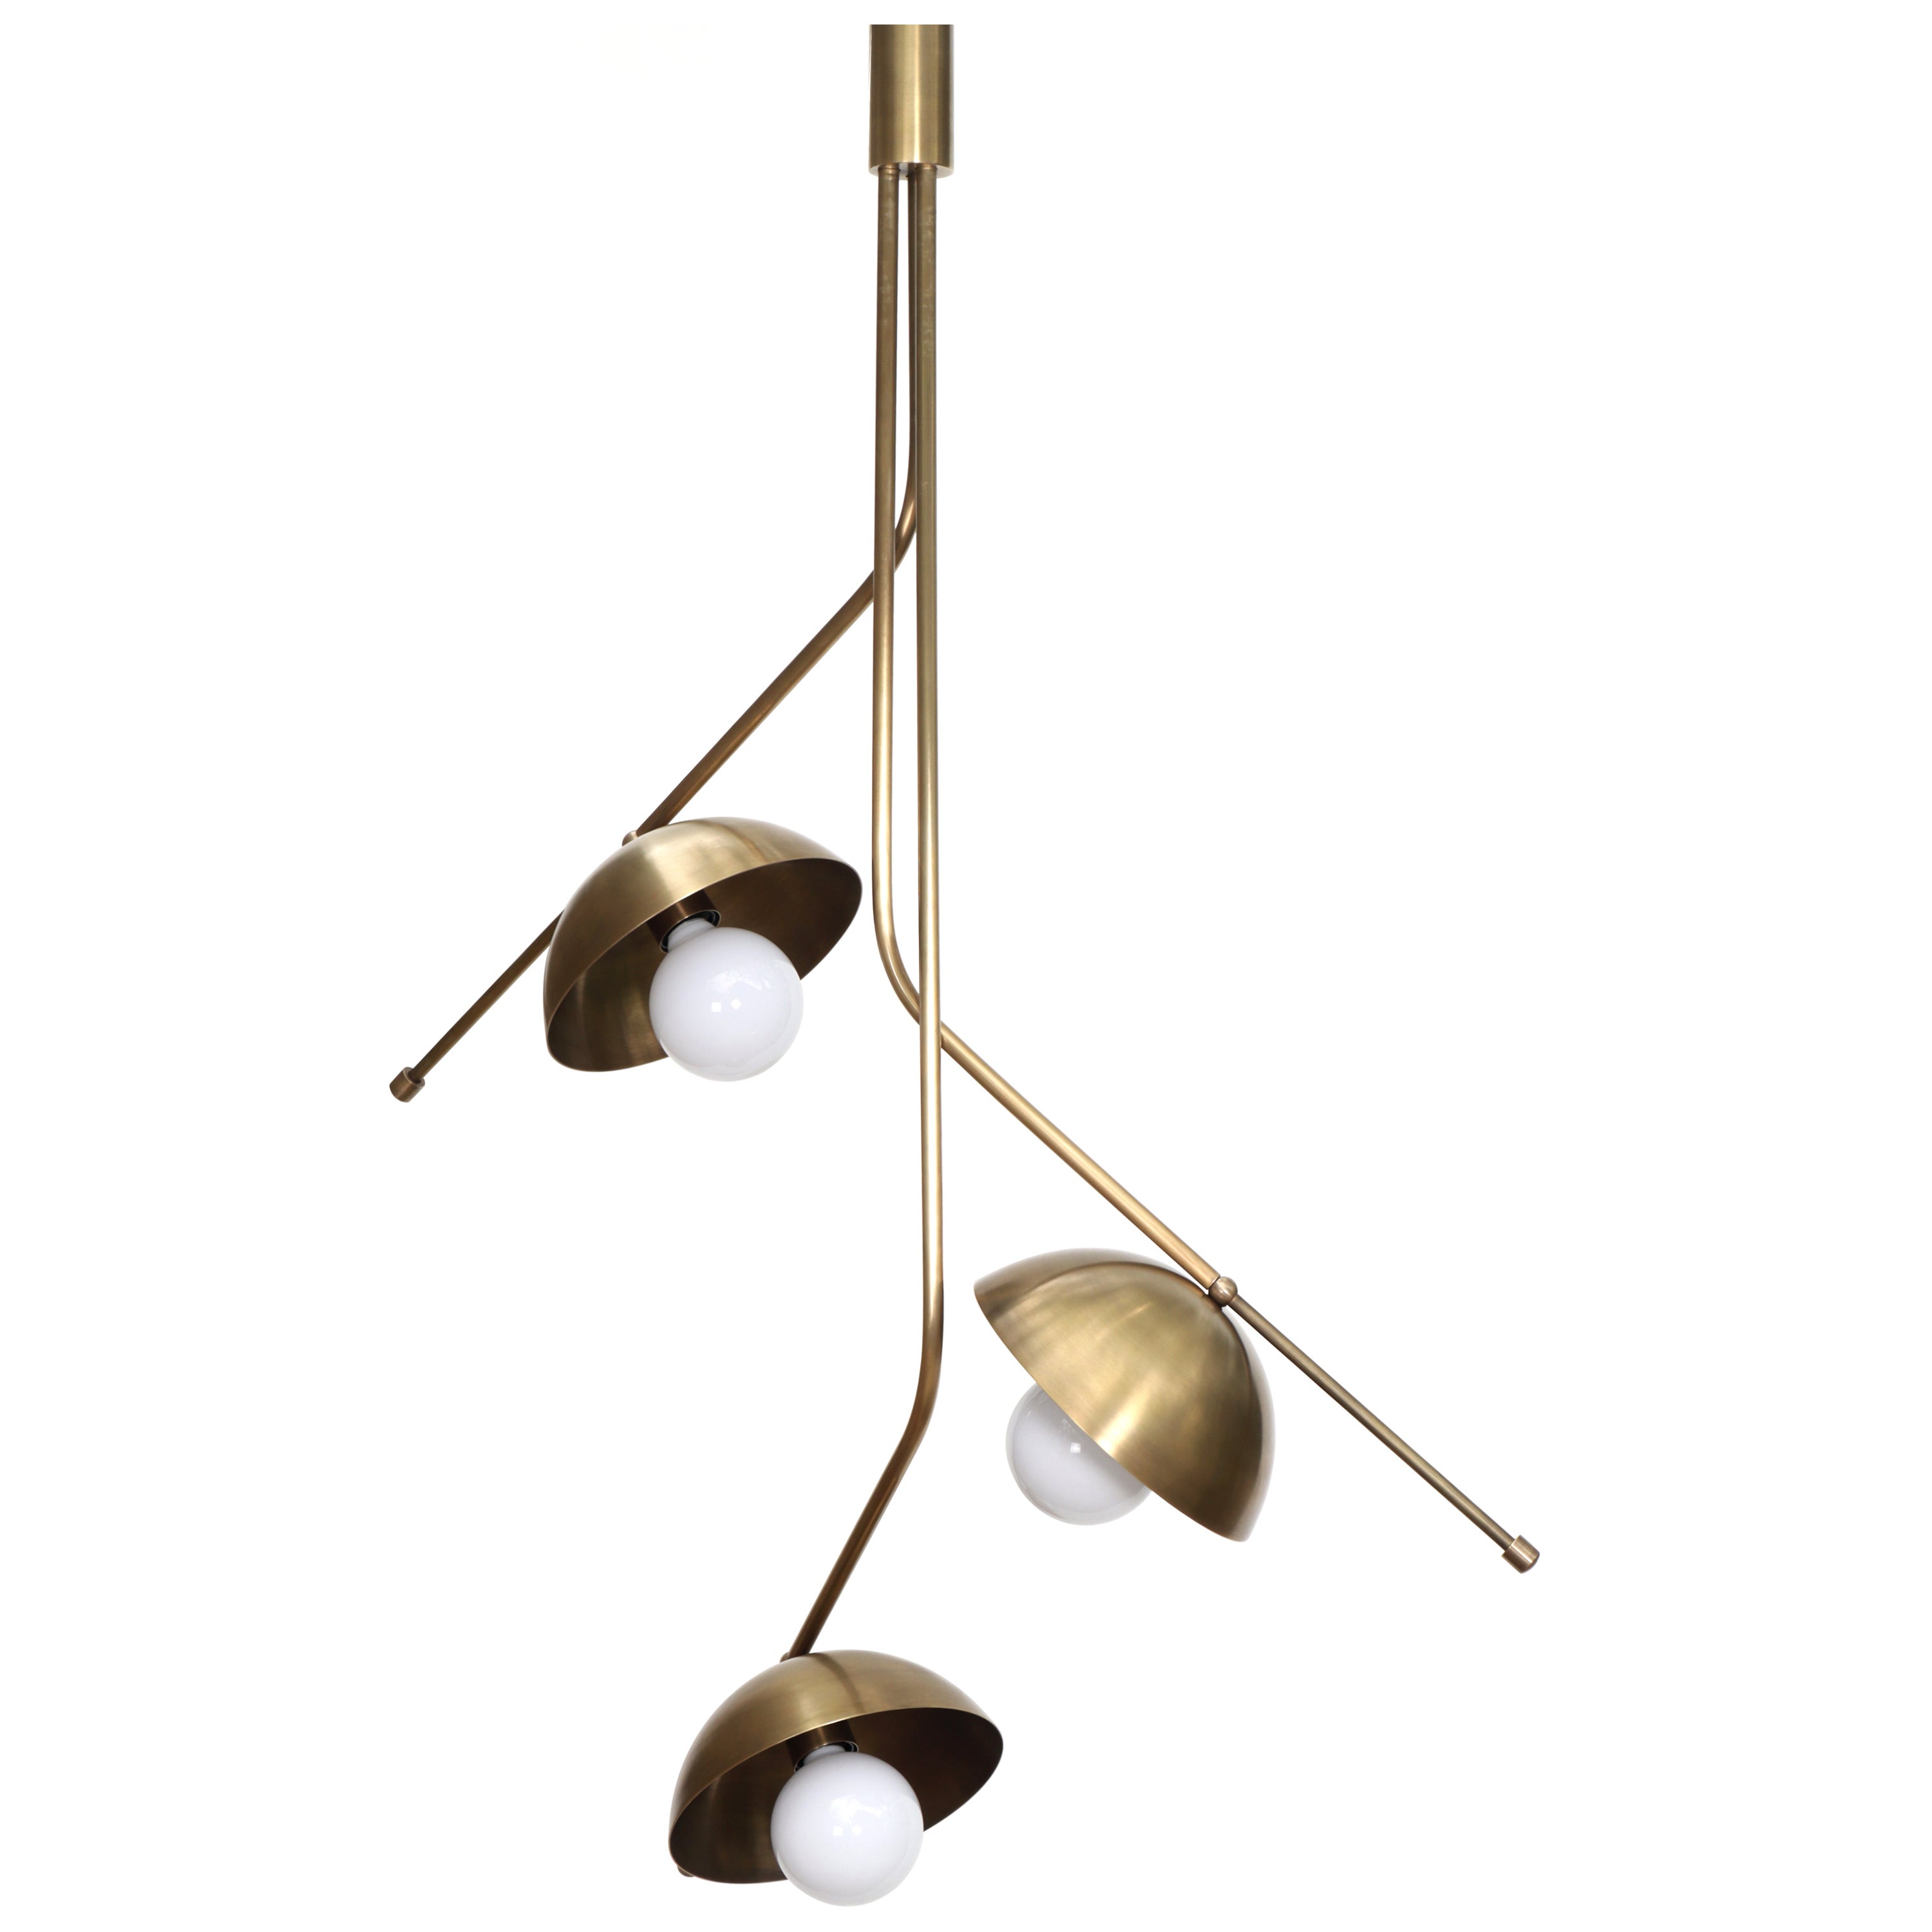 Wing 3 Brass Dome Suspension Lamp by Lamp Shaper